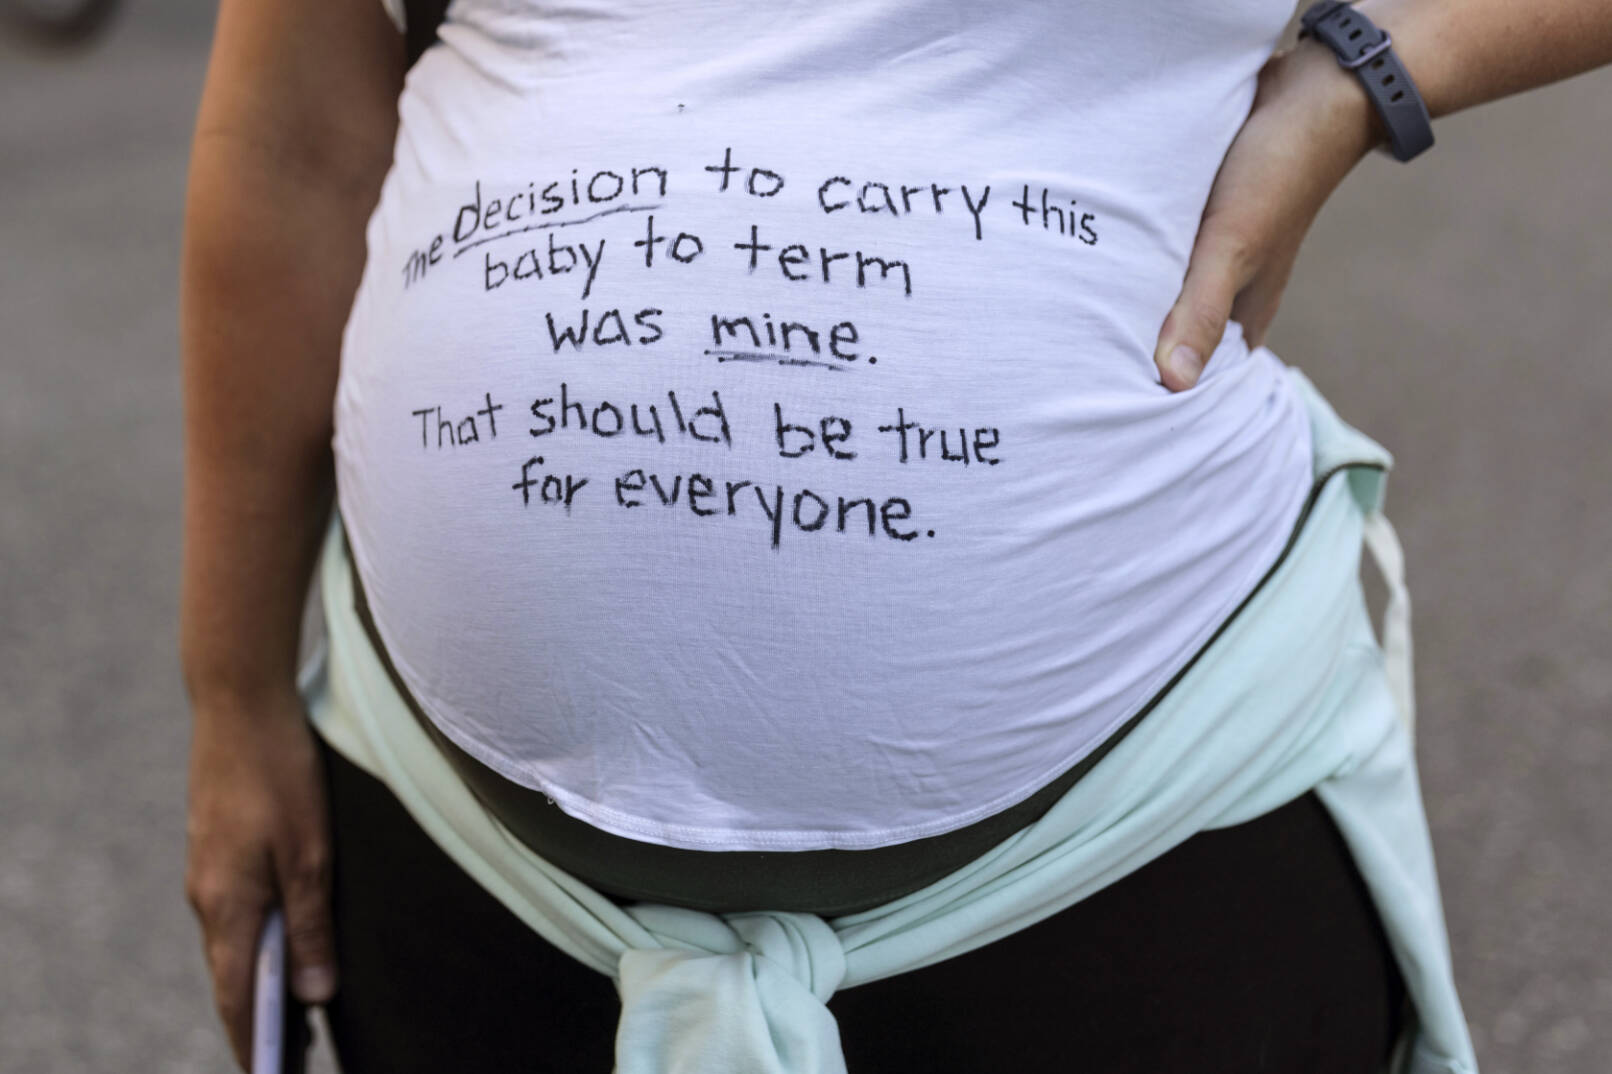 A pregnant protester is pictured with a message on her shirt in support of abortion rights during a march, Friday, June 24, 2022, in Seattle. The U.S. Supreme Court's decision to end constitutional protections for abortion has cleared the way for states to impose bans and restrictions on abortion — and will set off a series of legal battles. (AP Photo/Stephen Brashear)